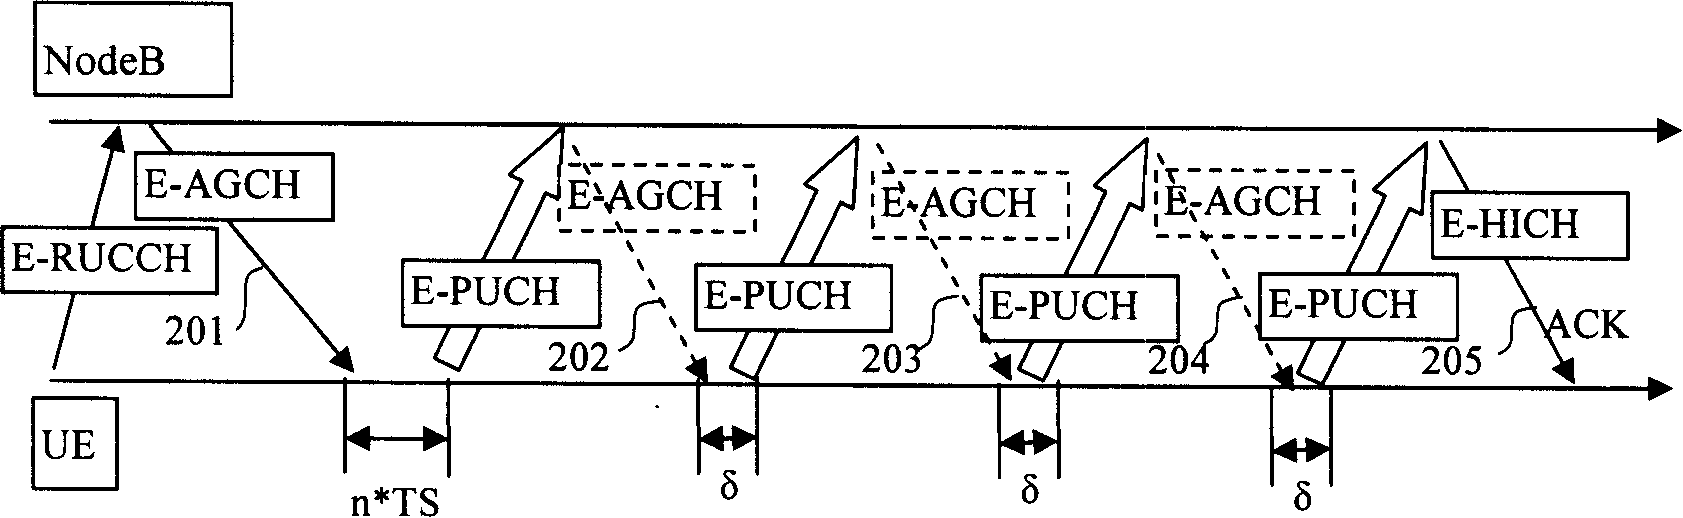 Method for distributing a plurality of power control instruction through virtual scheduling